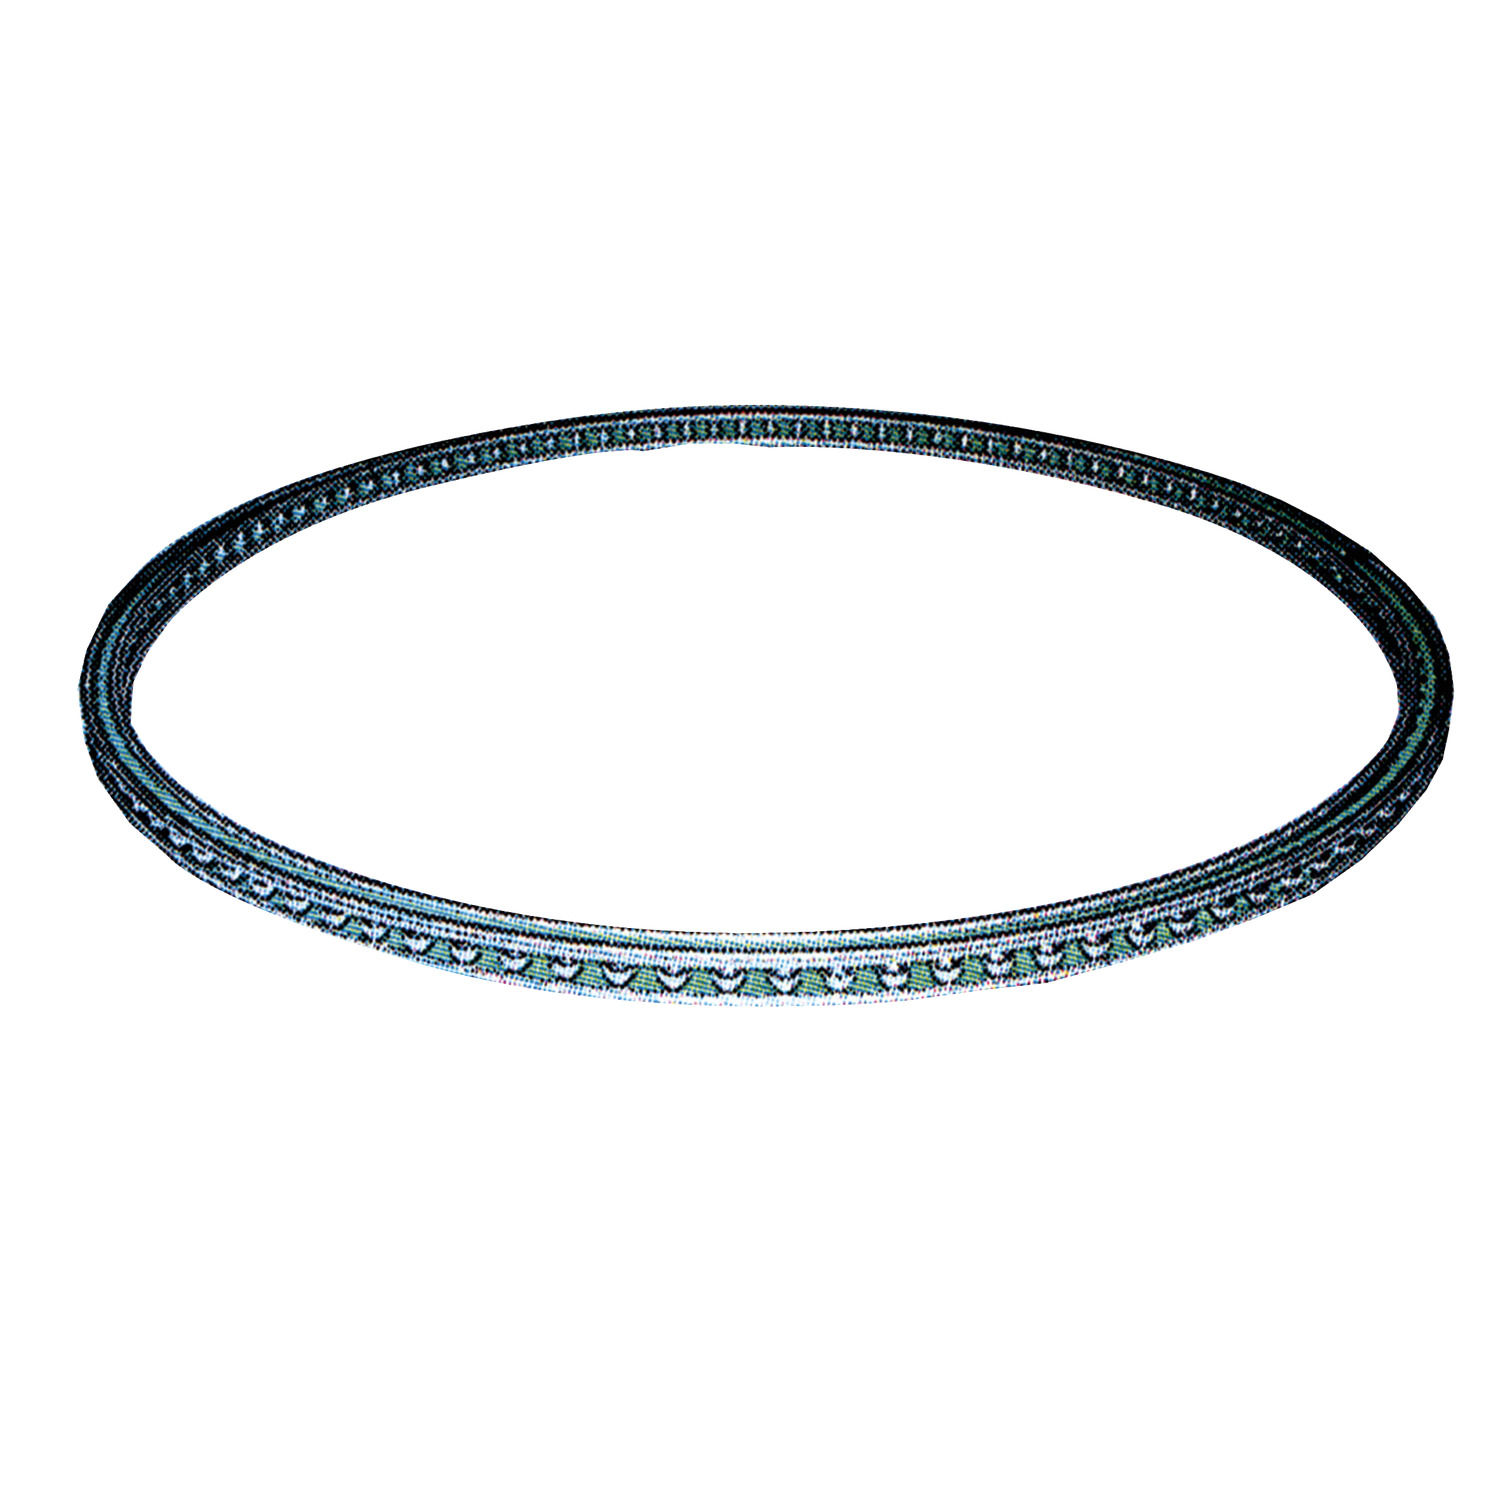 Product R4224.1, Ball Bearing - Wire imperial, ground raceway / 